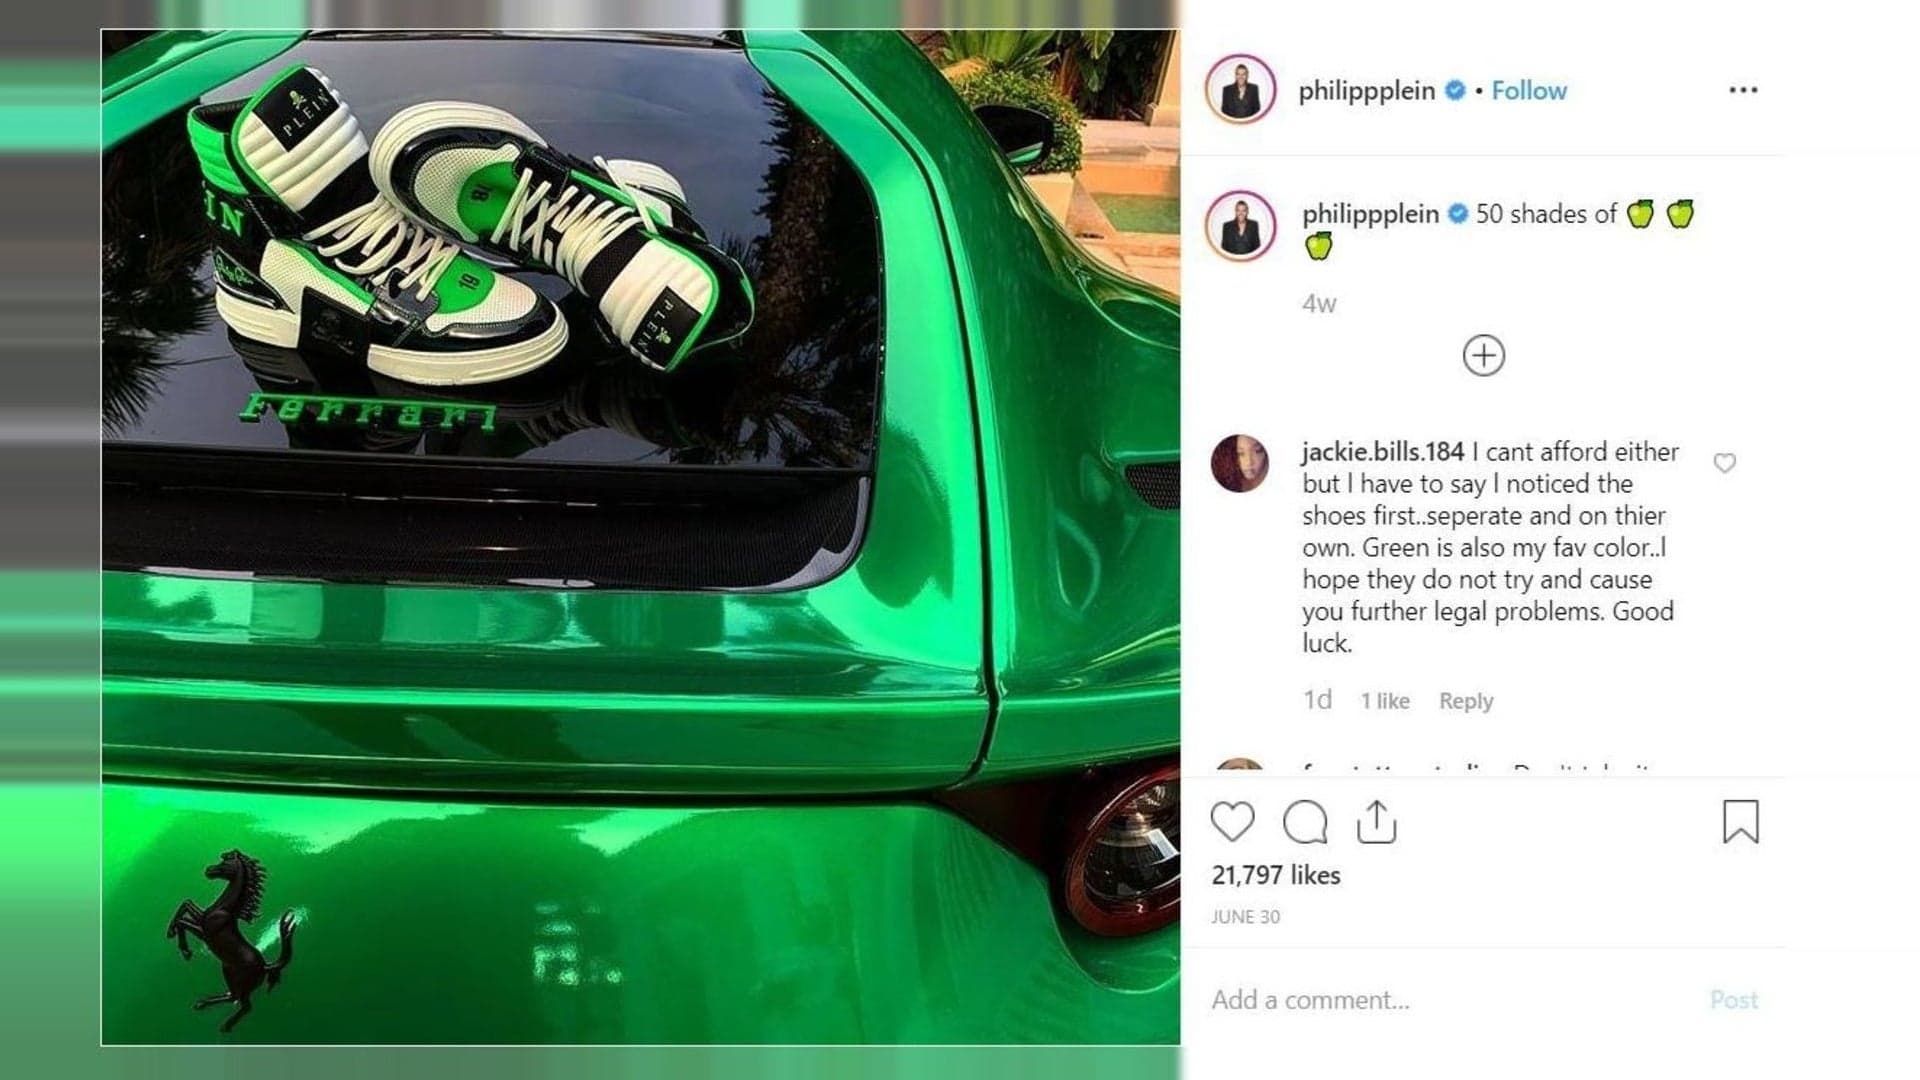 Ferrari Allegedly Threatens 812 Superfast Owner With Legal Action Over ‘Distasteful’ Instagram Posts